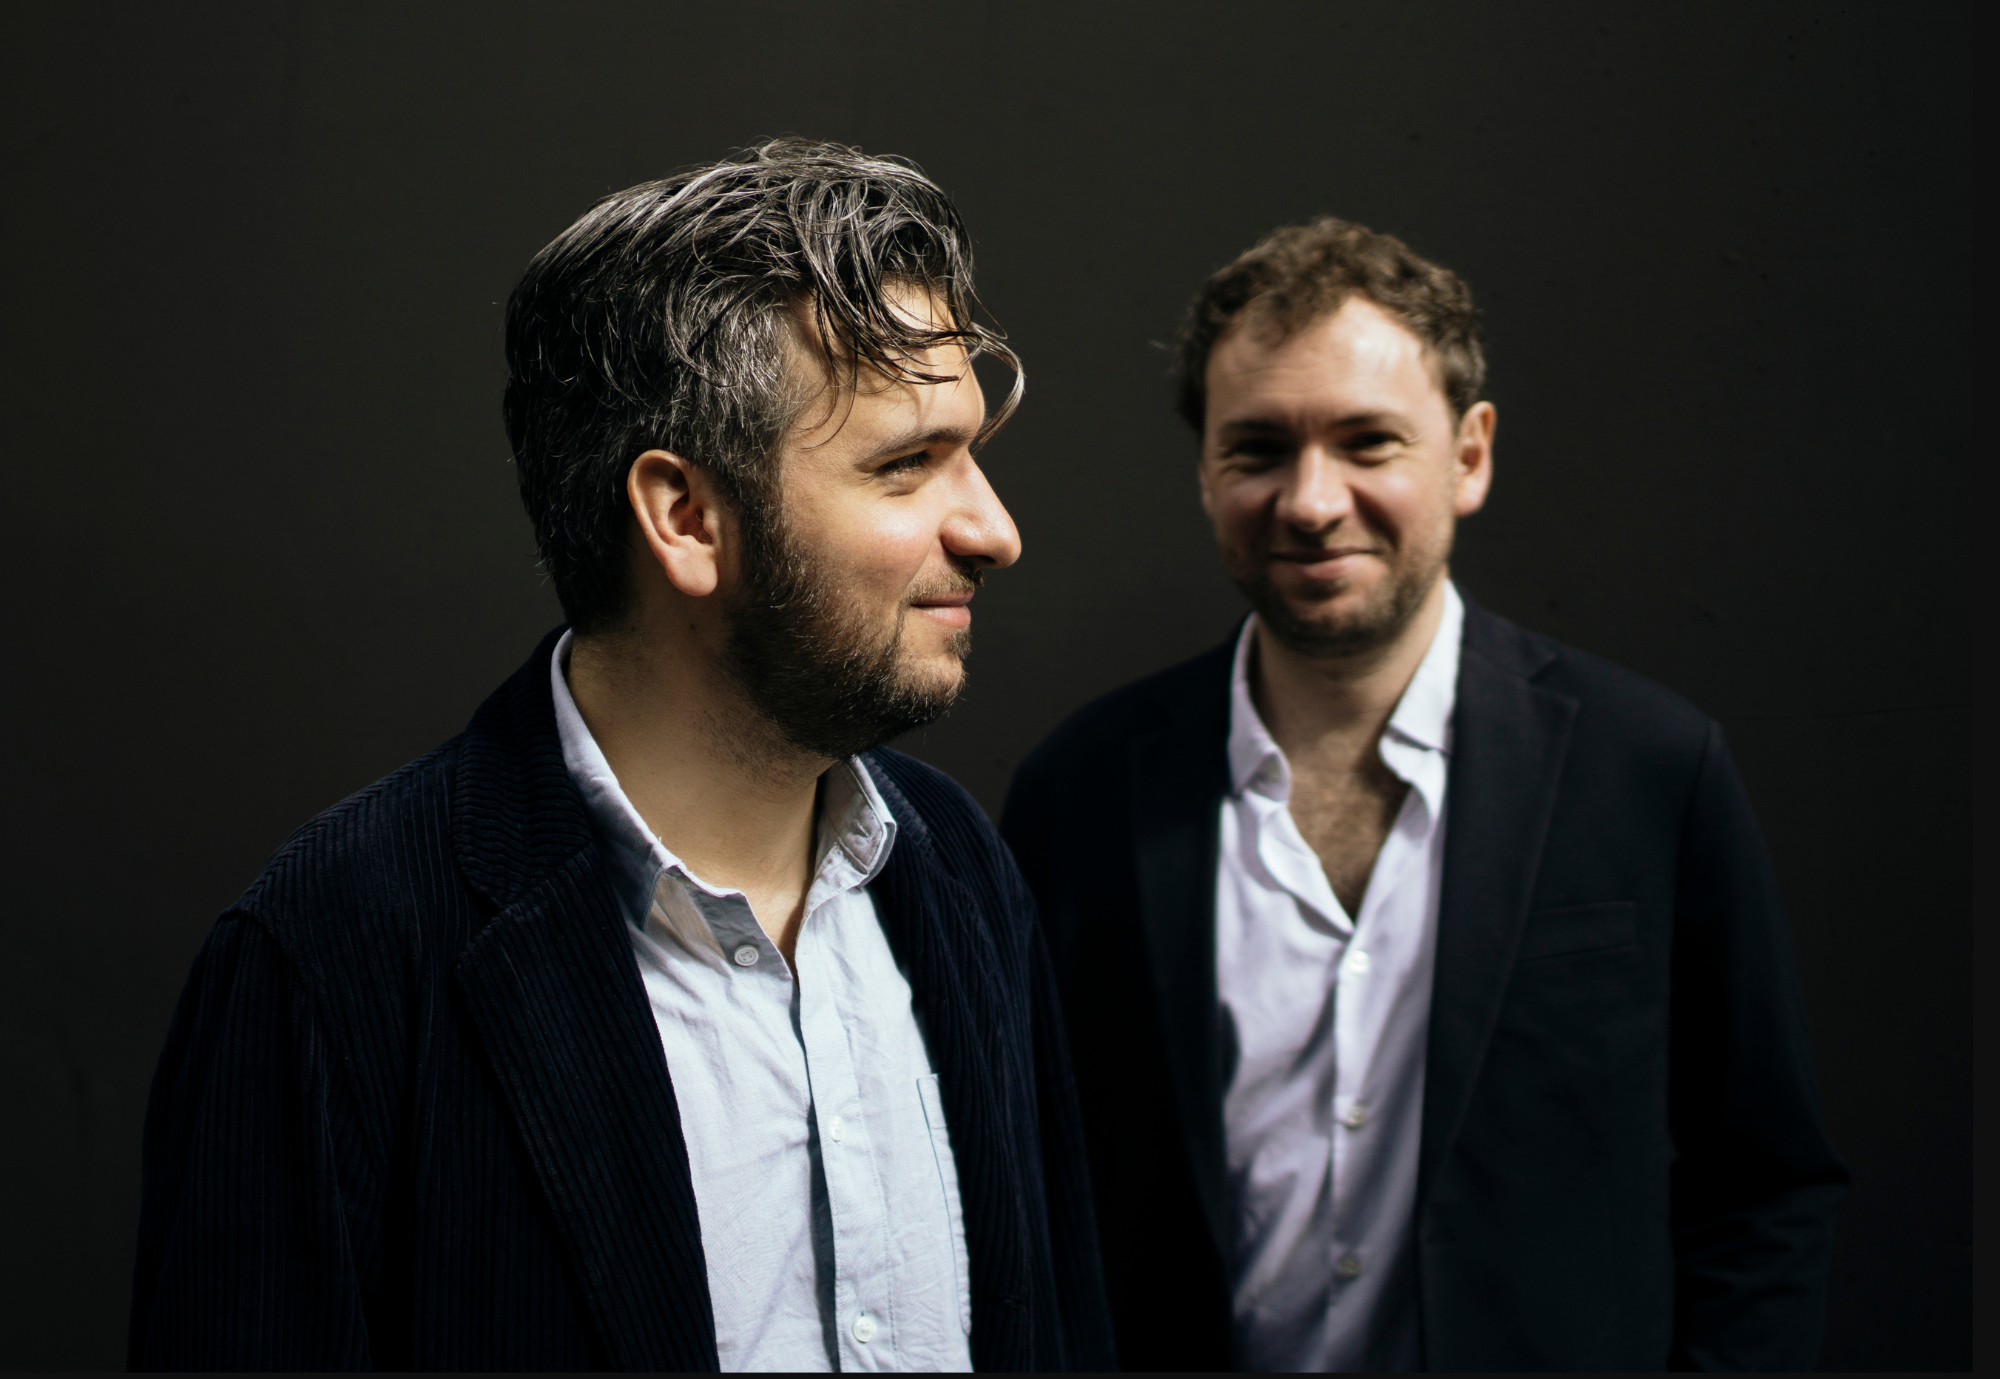 Concert | Duo Fouchenneret